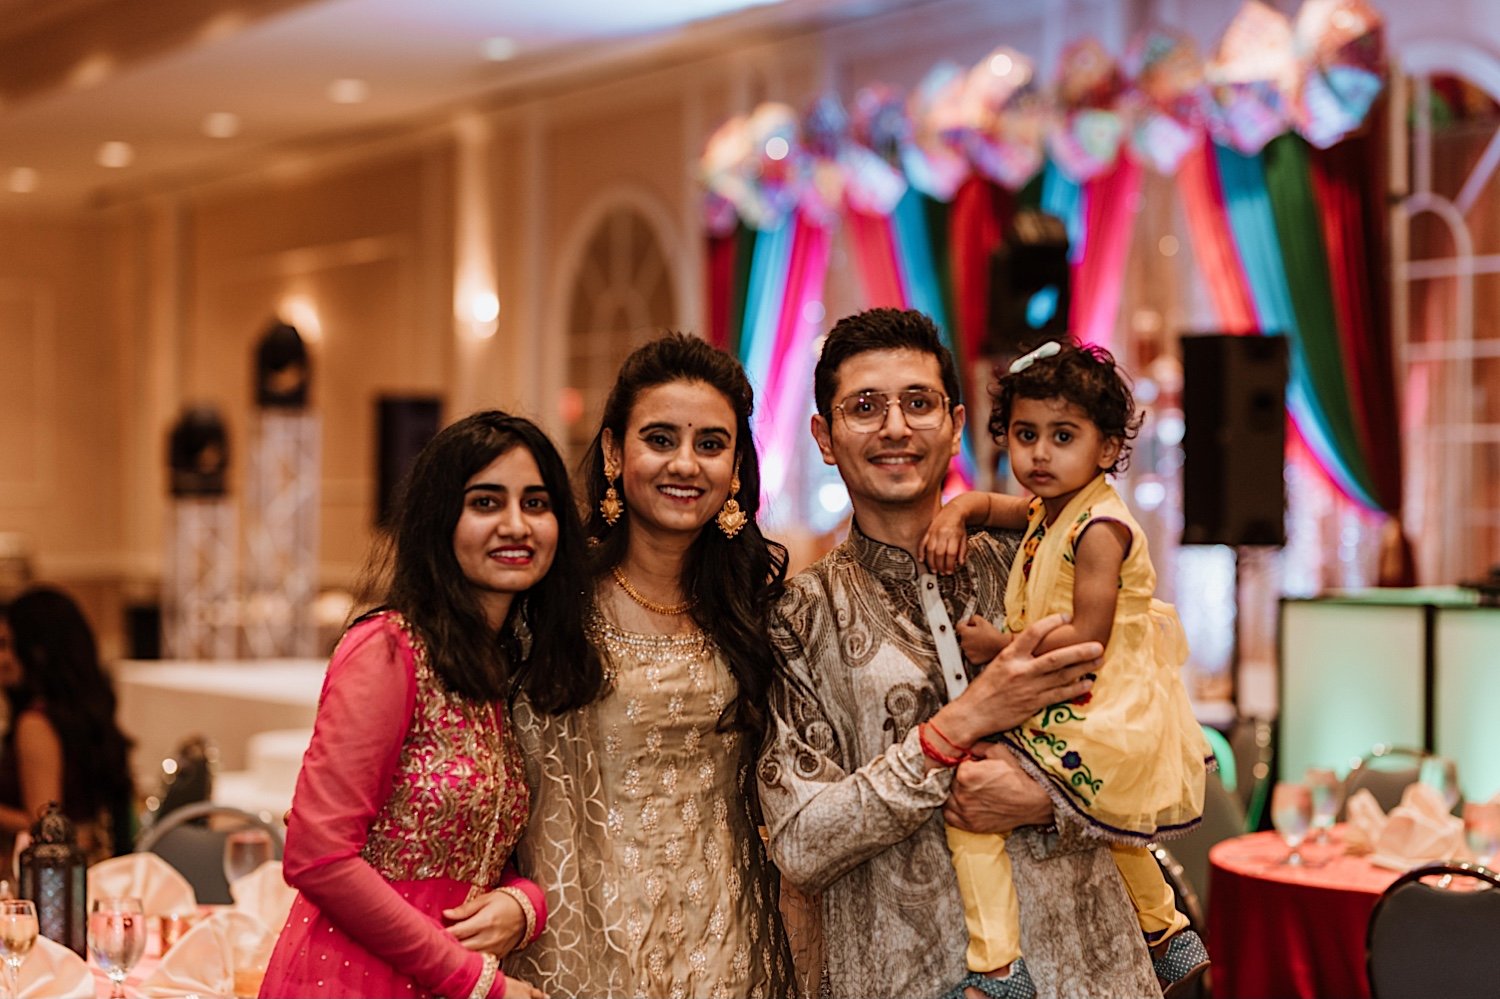 Family at Jago party for Chicago Indian Wedding